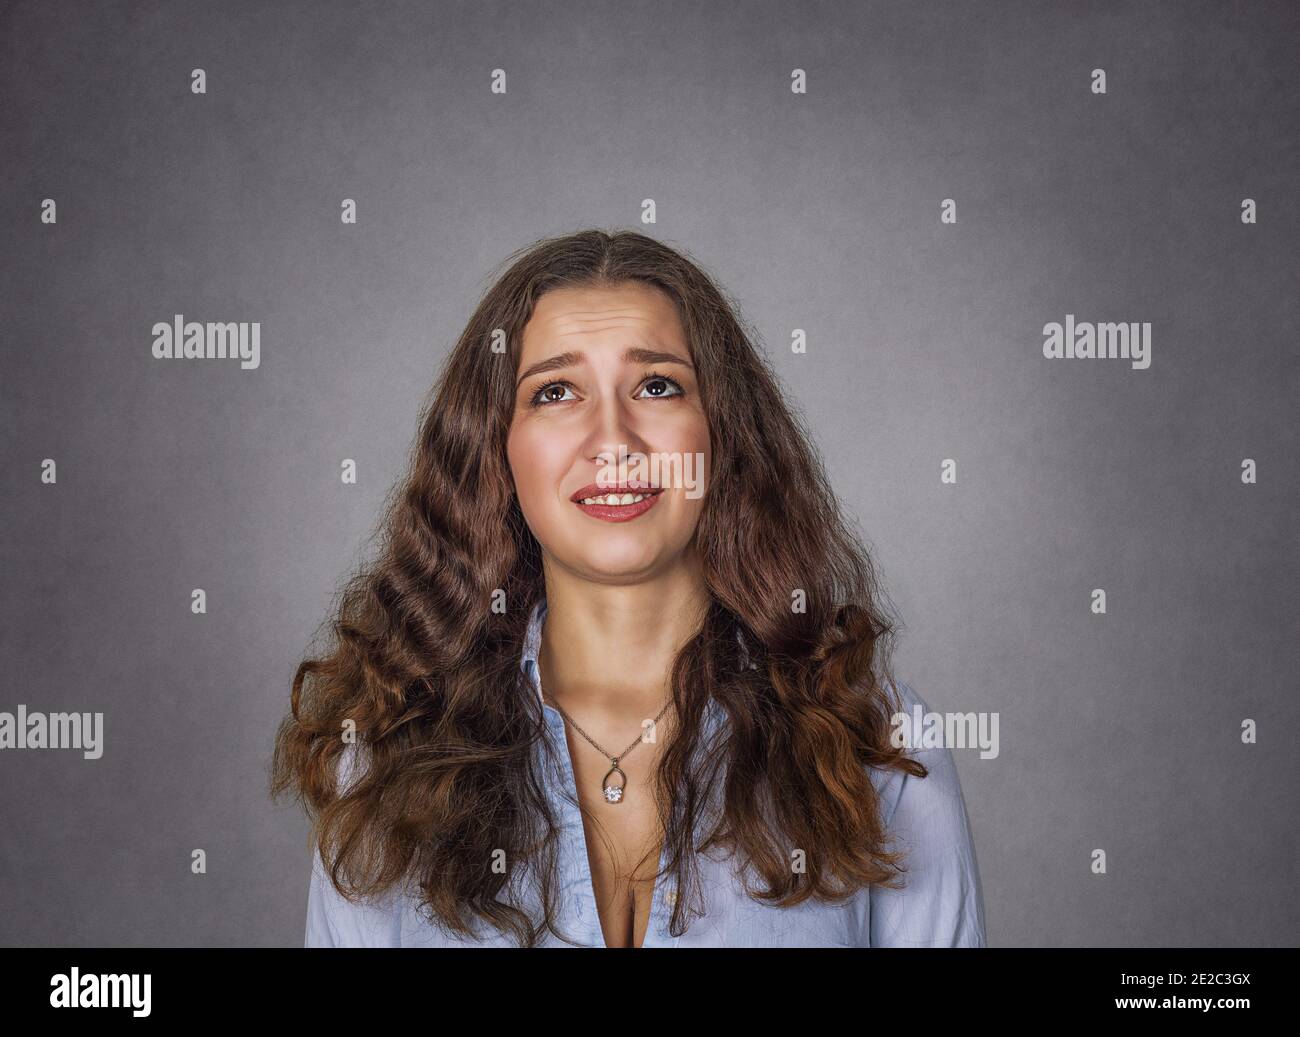 closeup portrait headshot cute unhappy woman looking up isolated on gray wall background with copy space above head. Human face expressions, emotions. Stock Photo